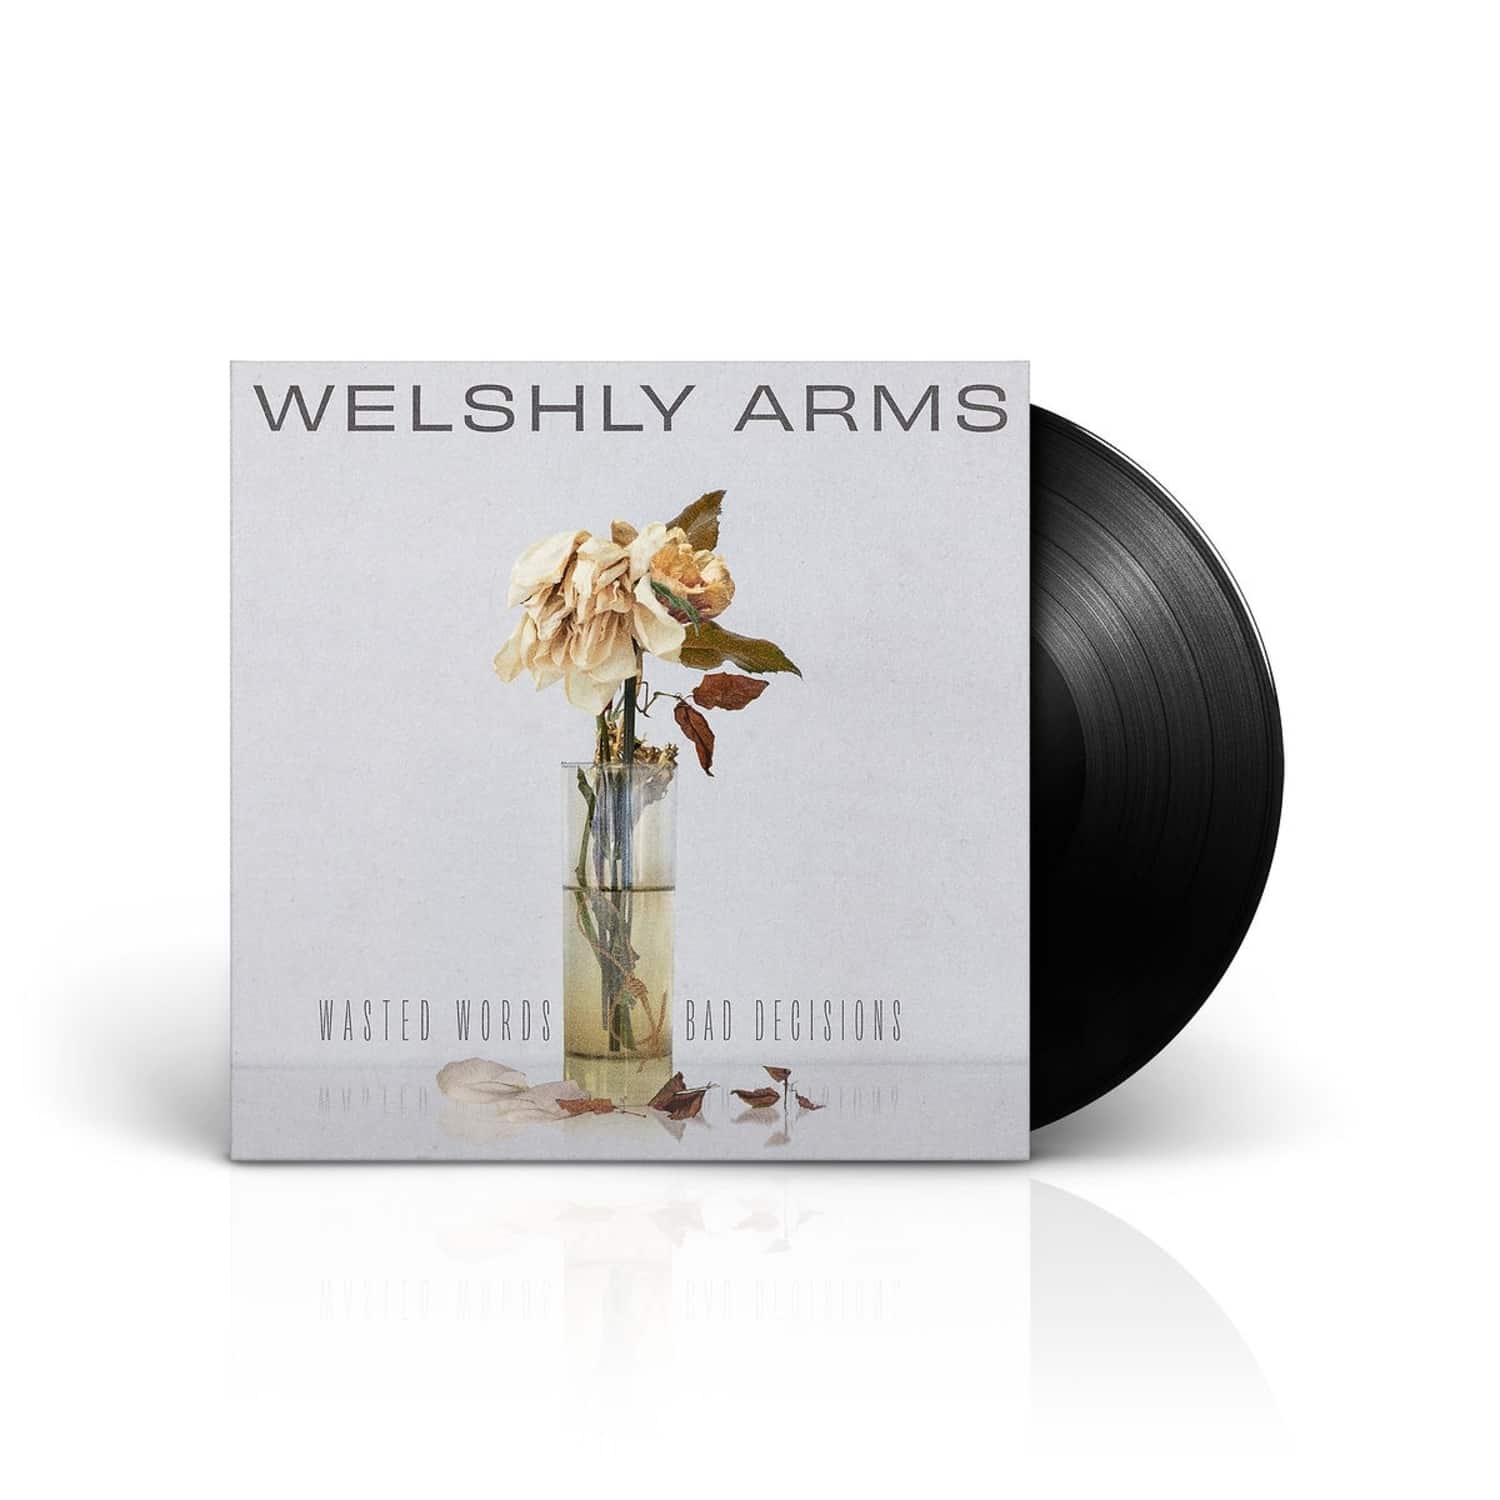 Welshly Arms - WASTED WORDS & BAD DECISIONS 